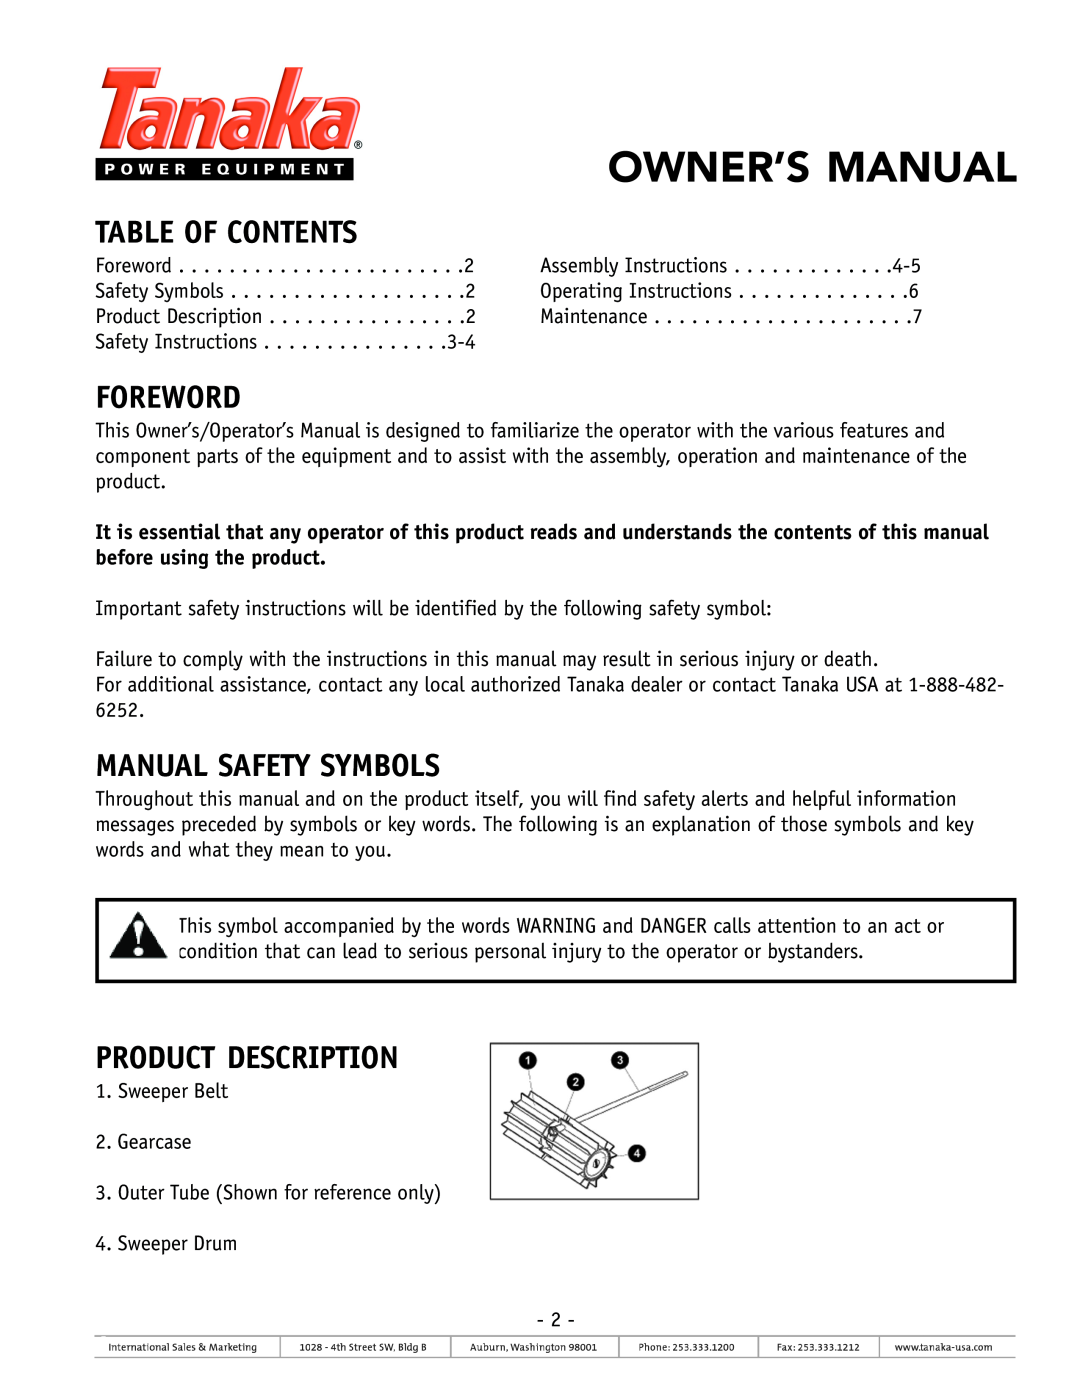 Tanaka TSW-210 owner manual Table Of Contents, Foreword, Manual Safety Symbols, Product Description 